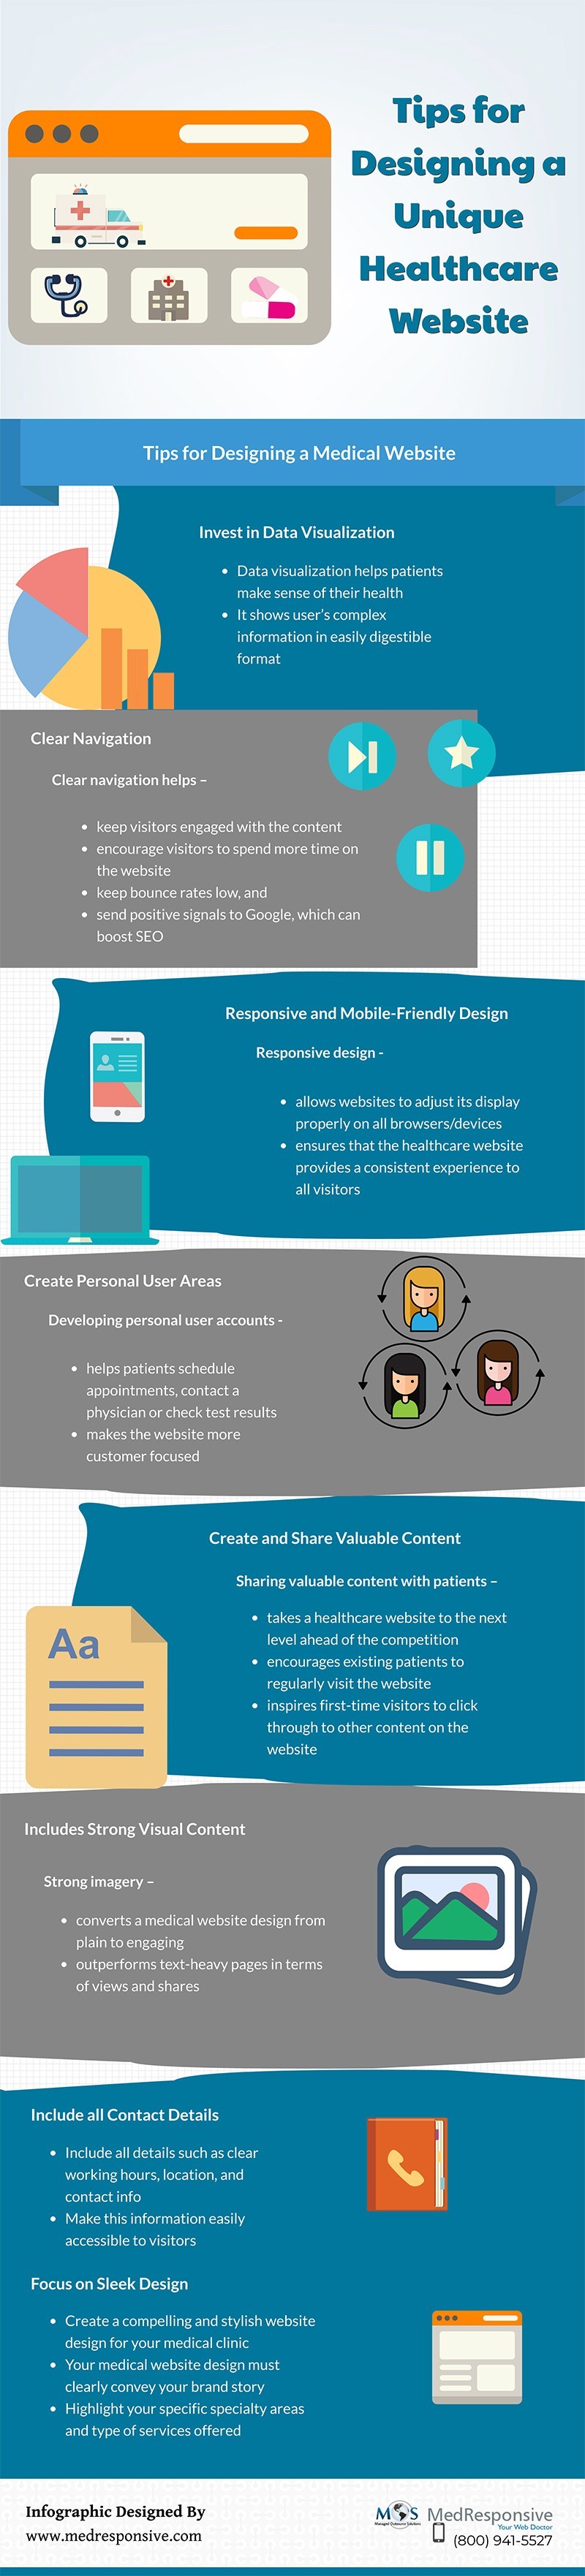 Tips for Designing a Unique Healthcare Website [Infographic]